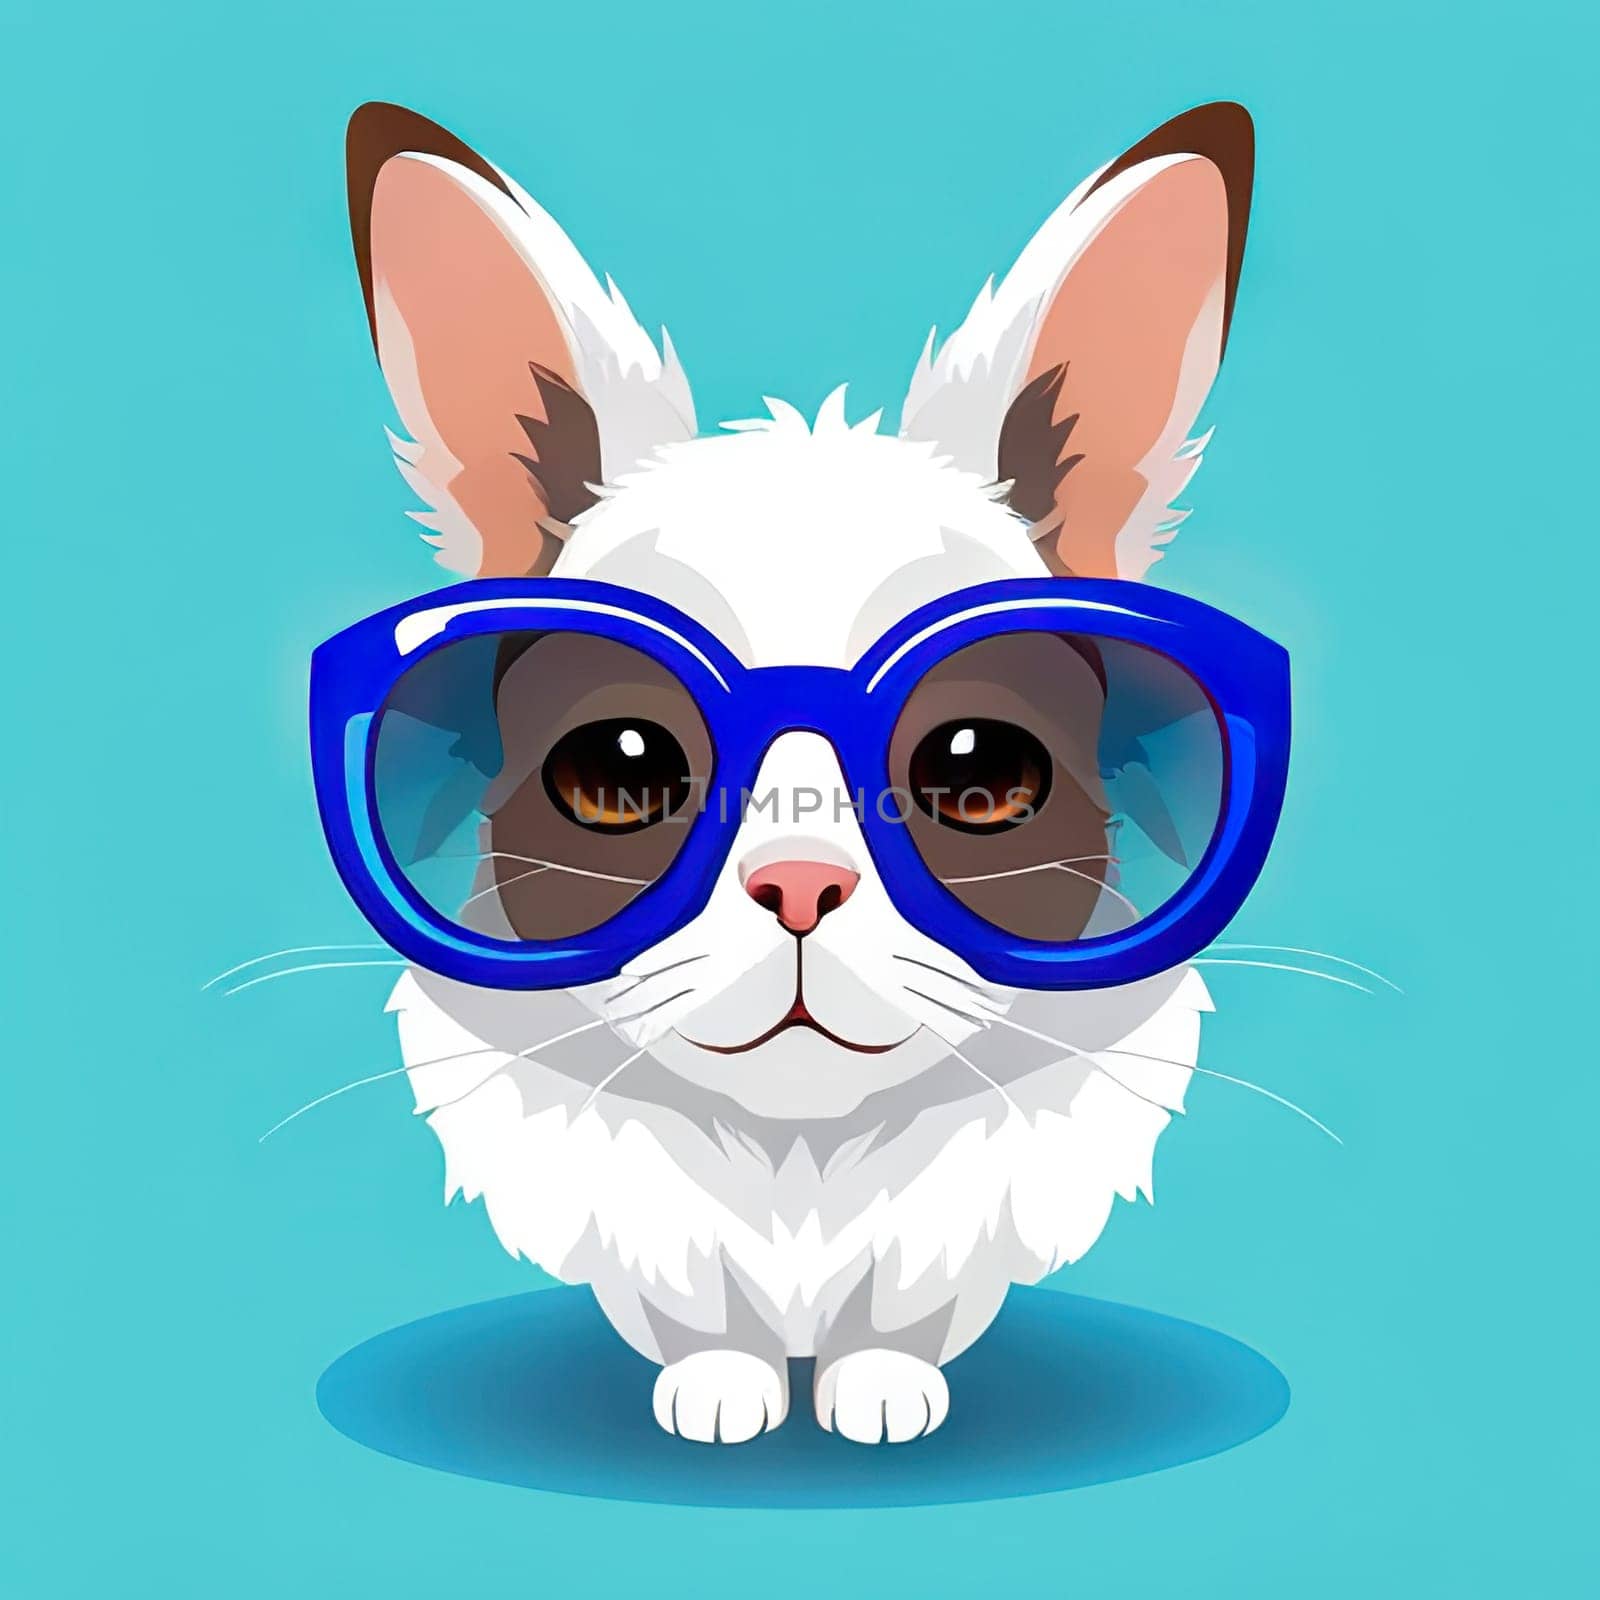 drawn cat in sunglasses on a colored background by EkaterinaPereslavtseva